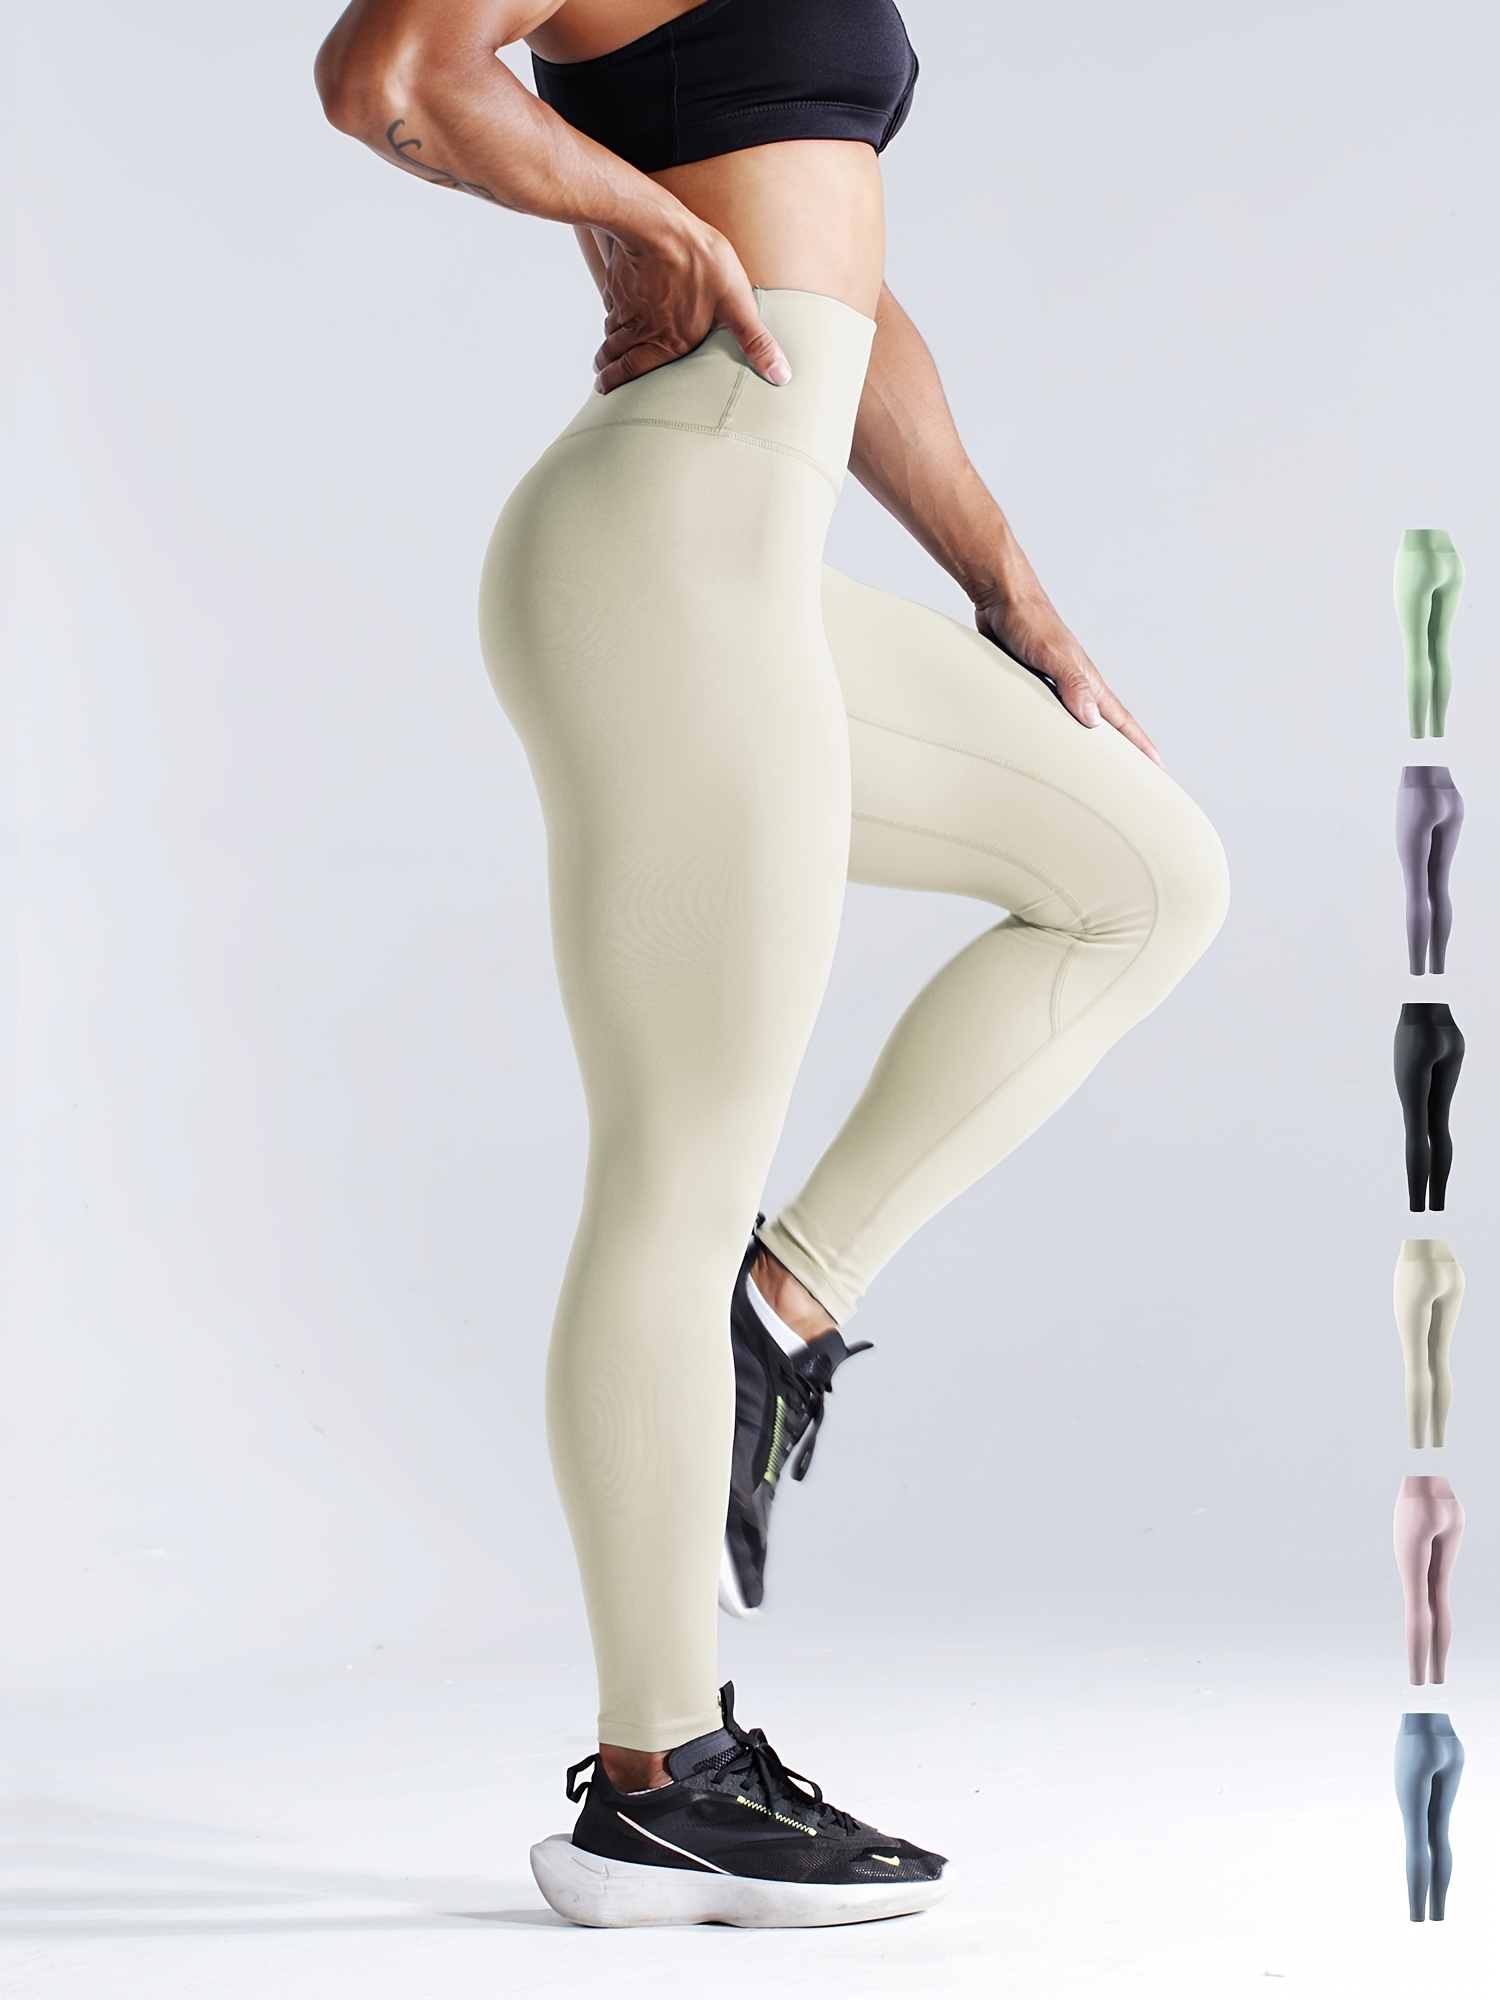 Pain Solid Leggings / Solid Colors Yoga Pants / Gym Pants / Bold Colors /  Flexible and Resistant Lycra Blend / One Size. -  Canada